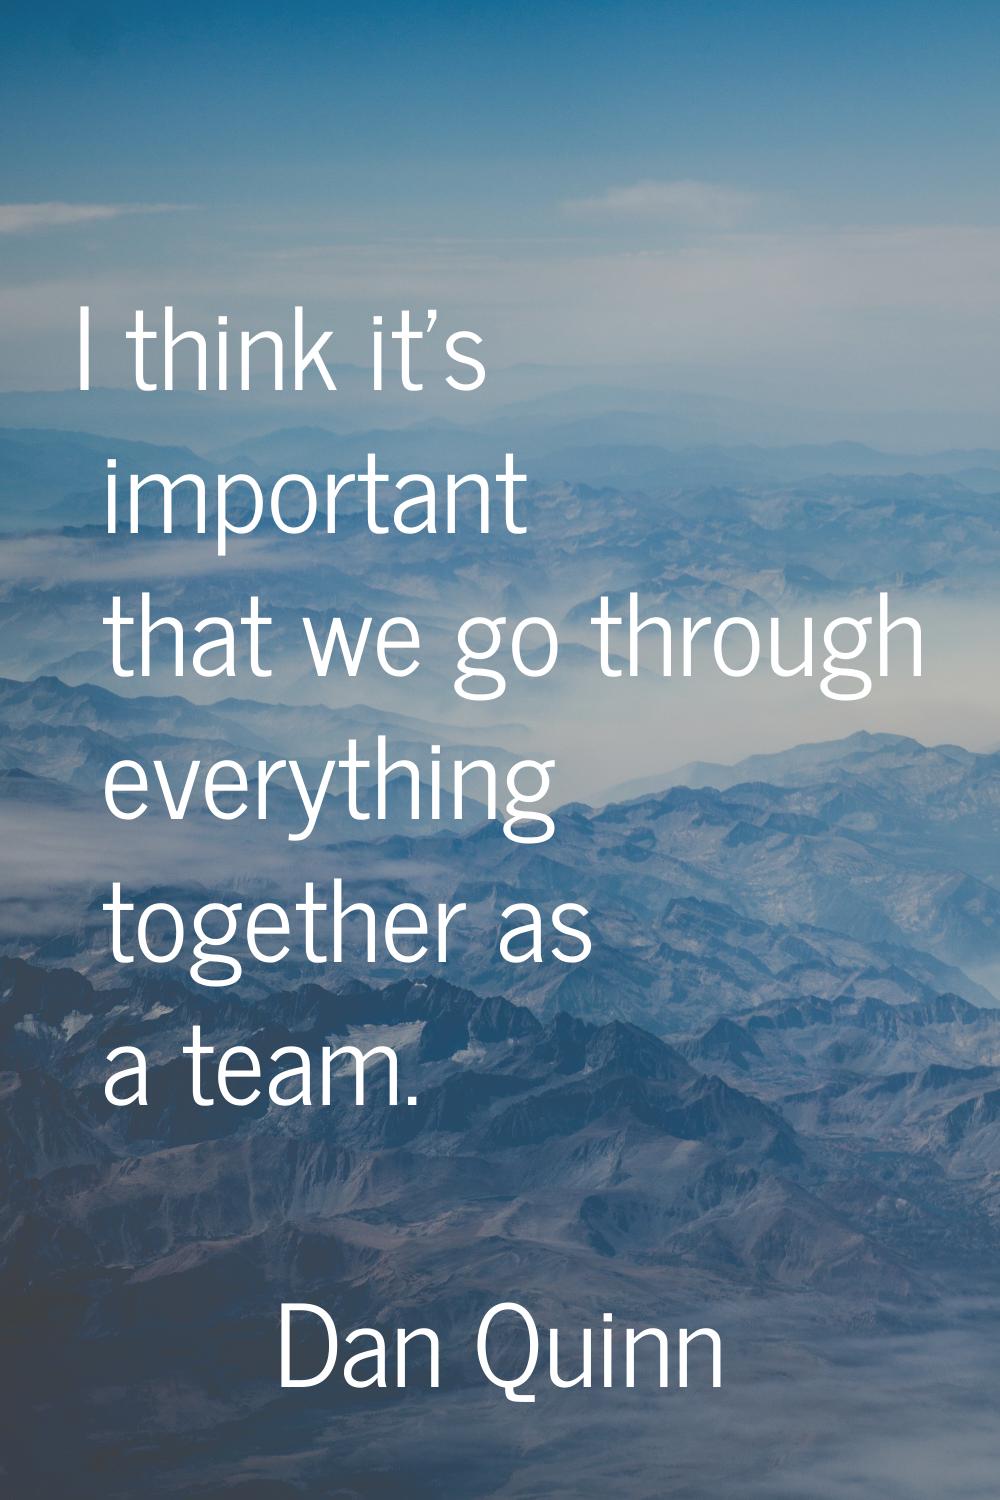 I think it's important that we go through everything together as a team.